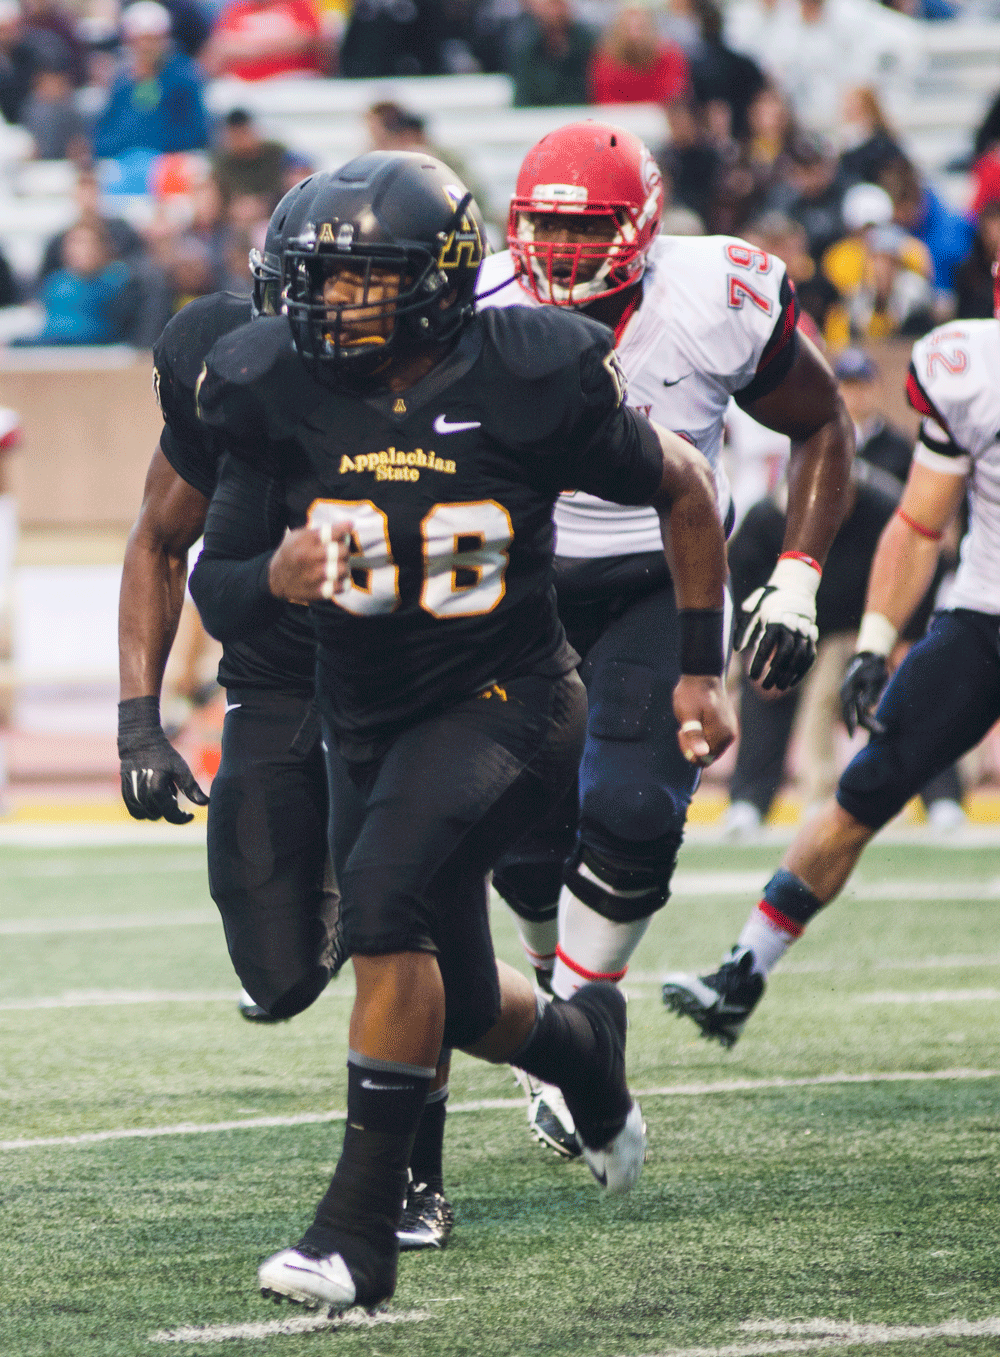 Inside+linebacker+John+Law+at+Kidd+Brewer+Stadium+during+the+homecoming+football+game+against+Liberty+University.+Photo+by+Cara+Croom++%7C++The+Appalachian